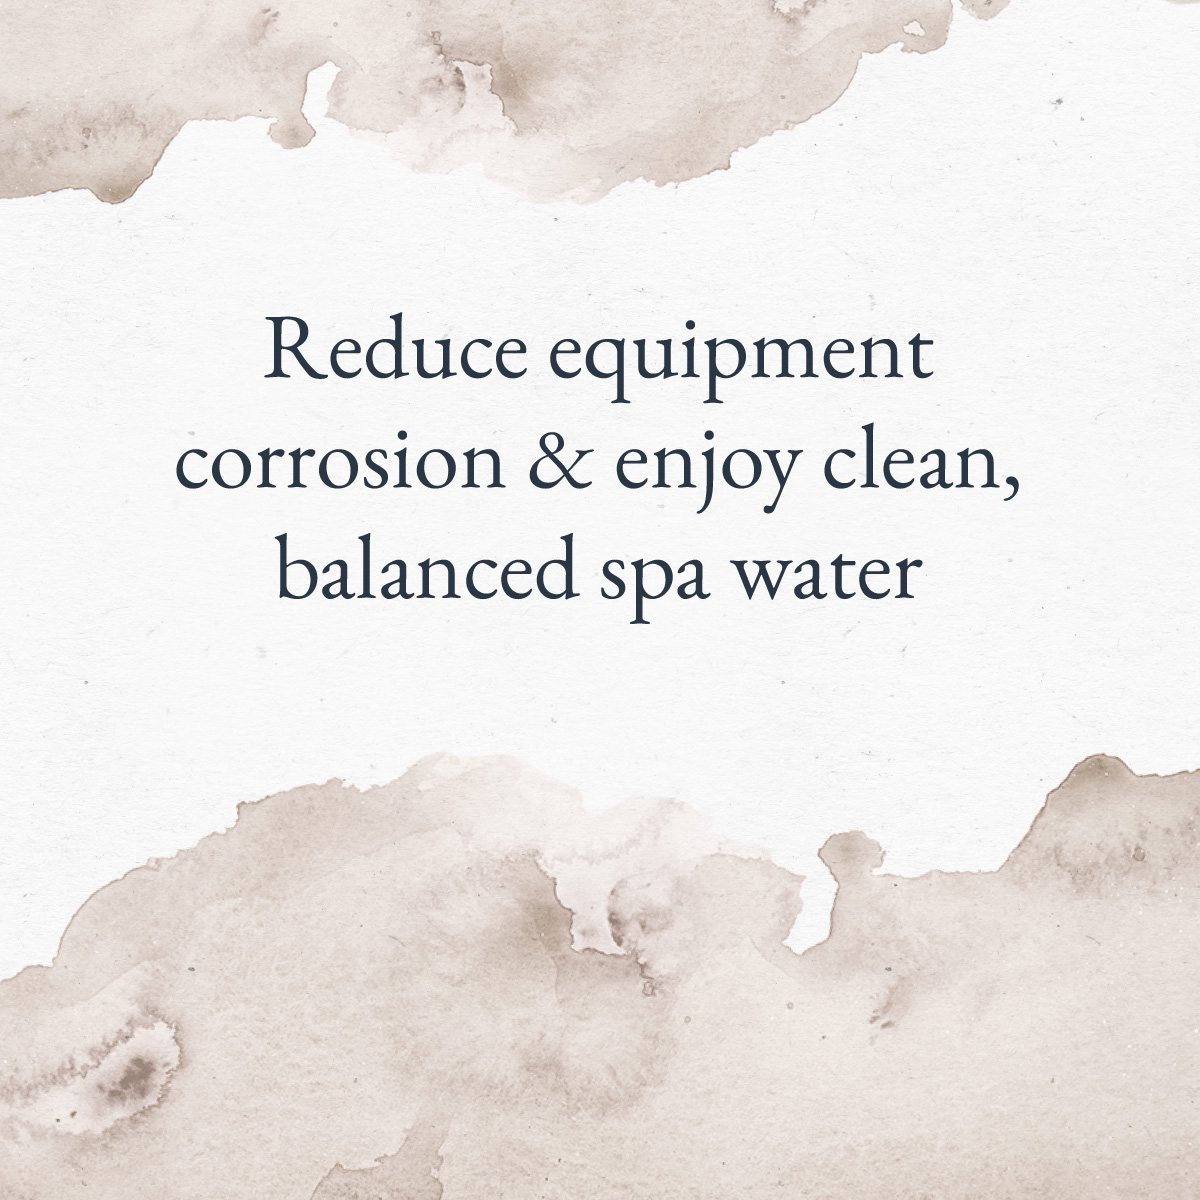 Reduces the chance of equipment corrosion with clean, balanced spa water